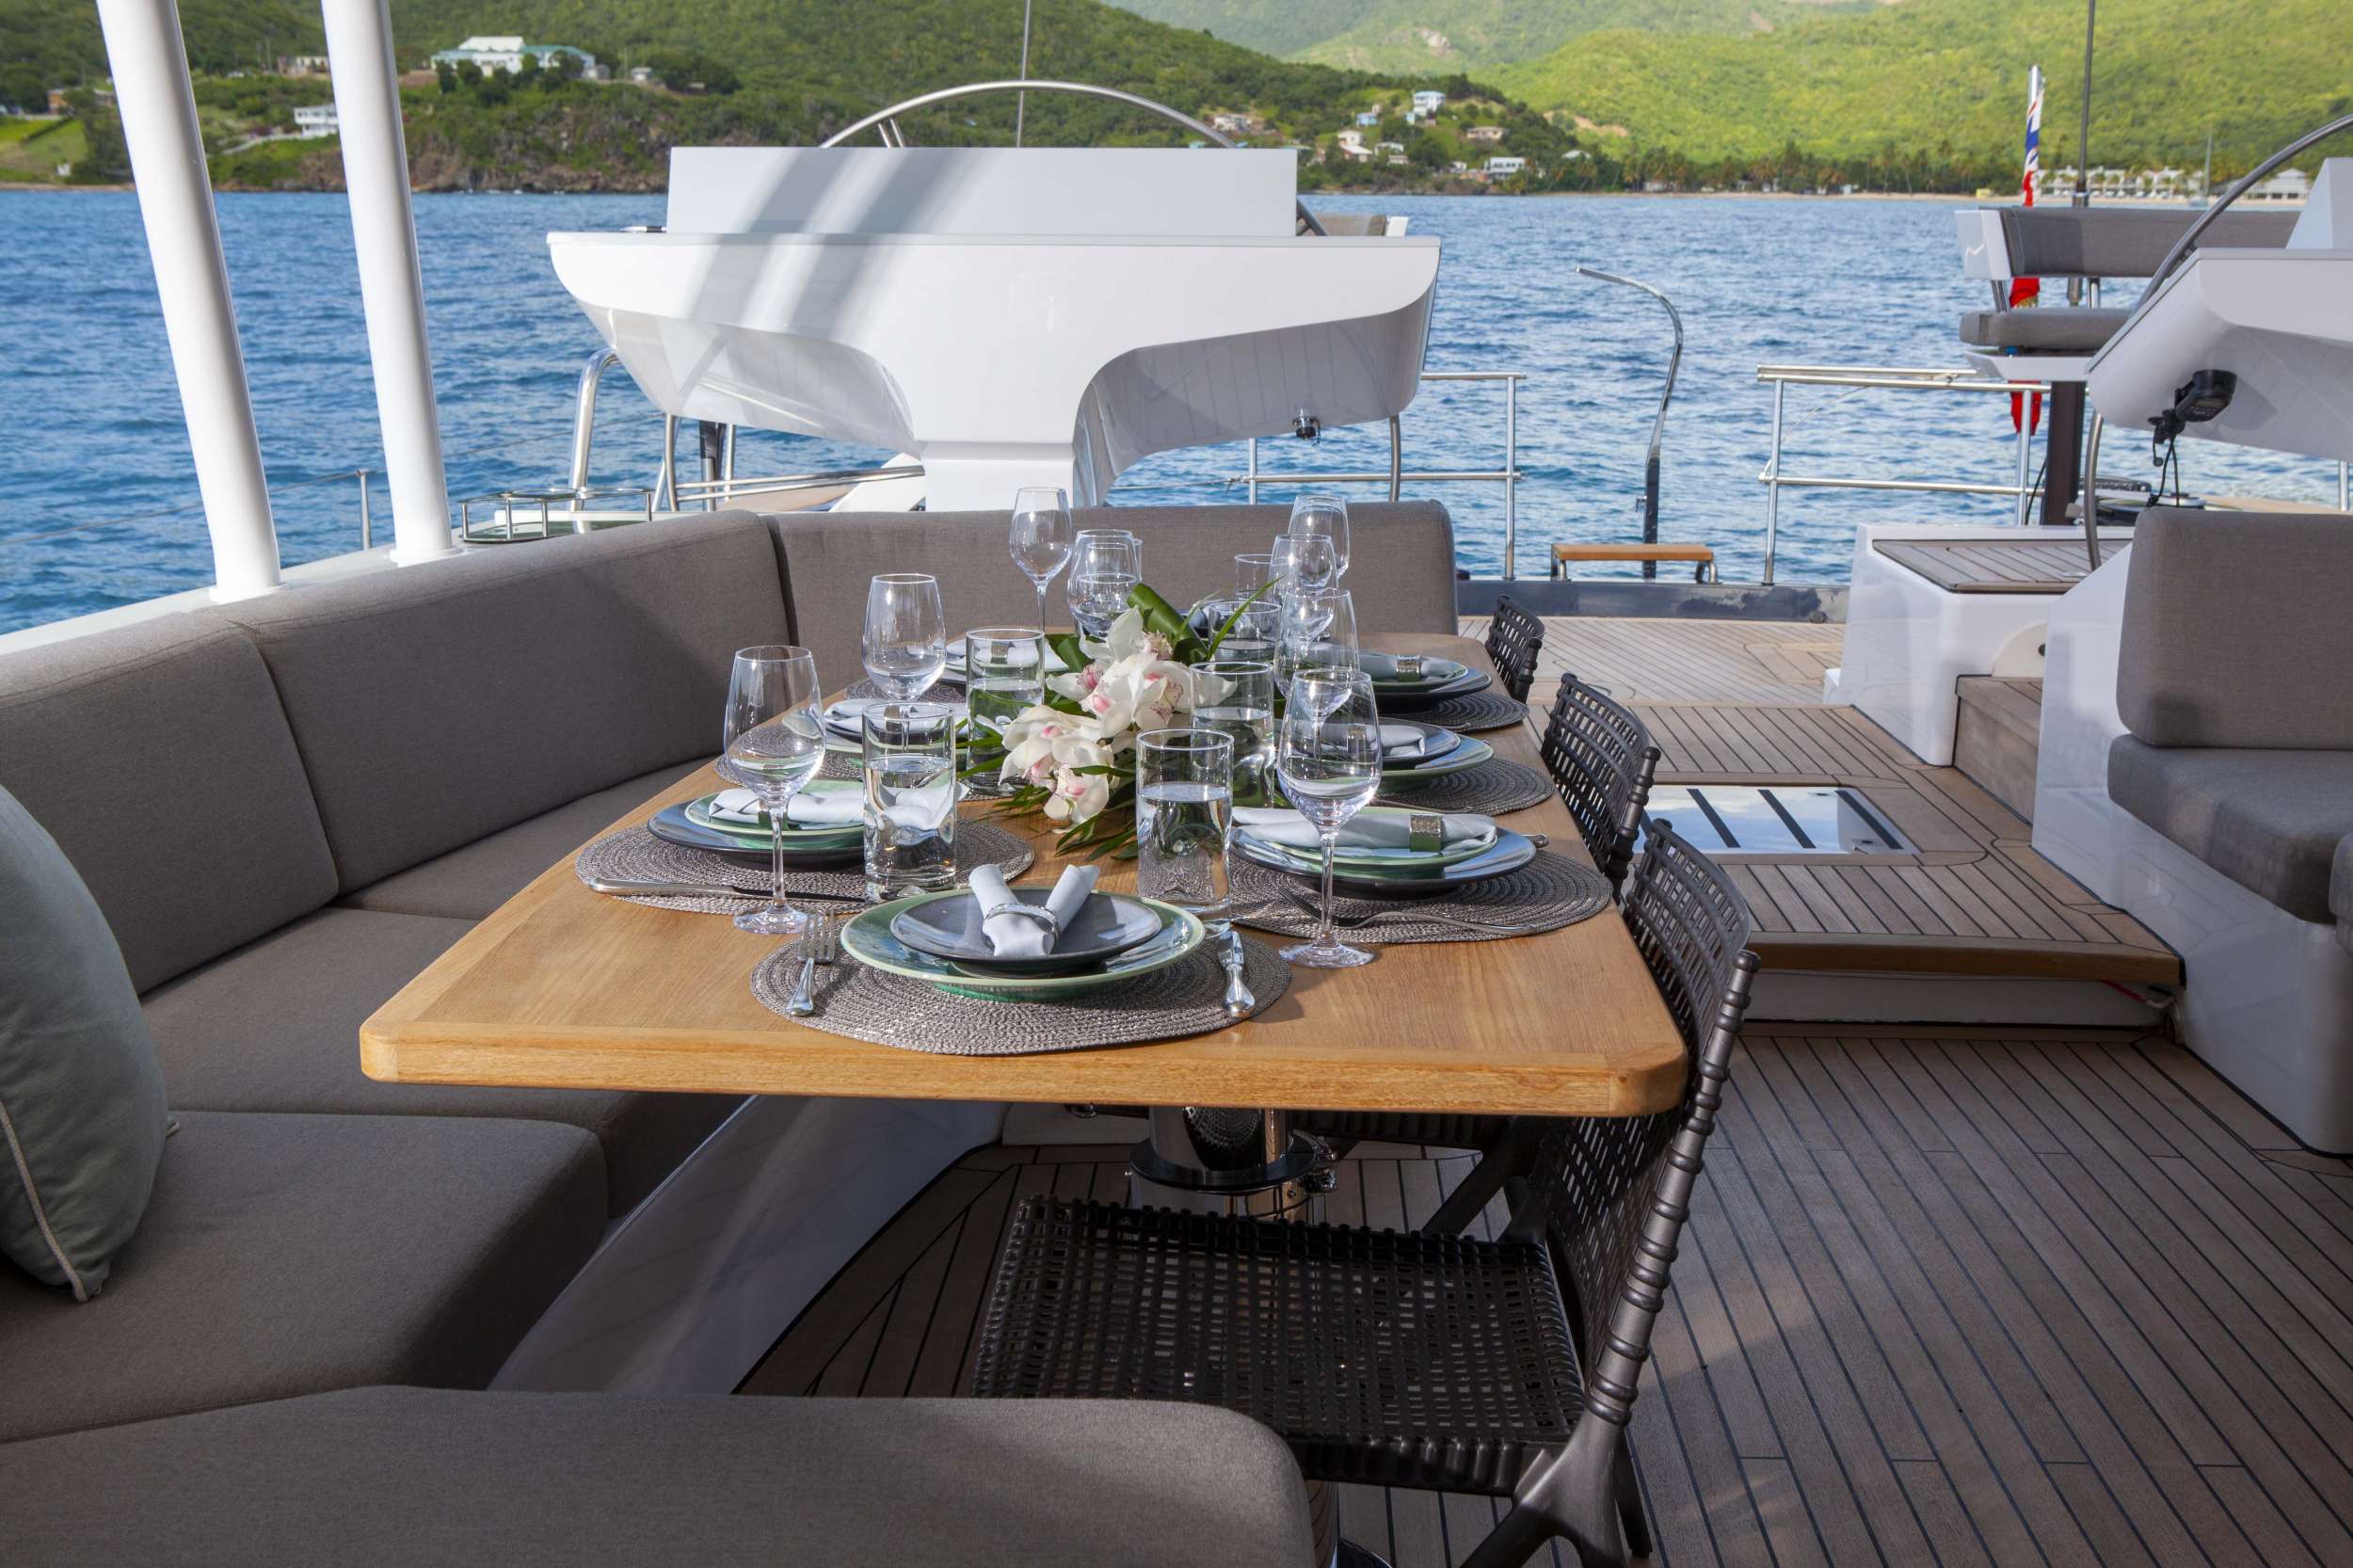 2 deck tables can each seat 8 comfortably &amp; convert to large lounging area when not in use